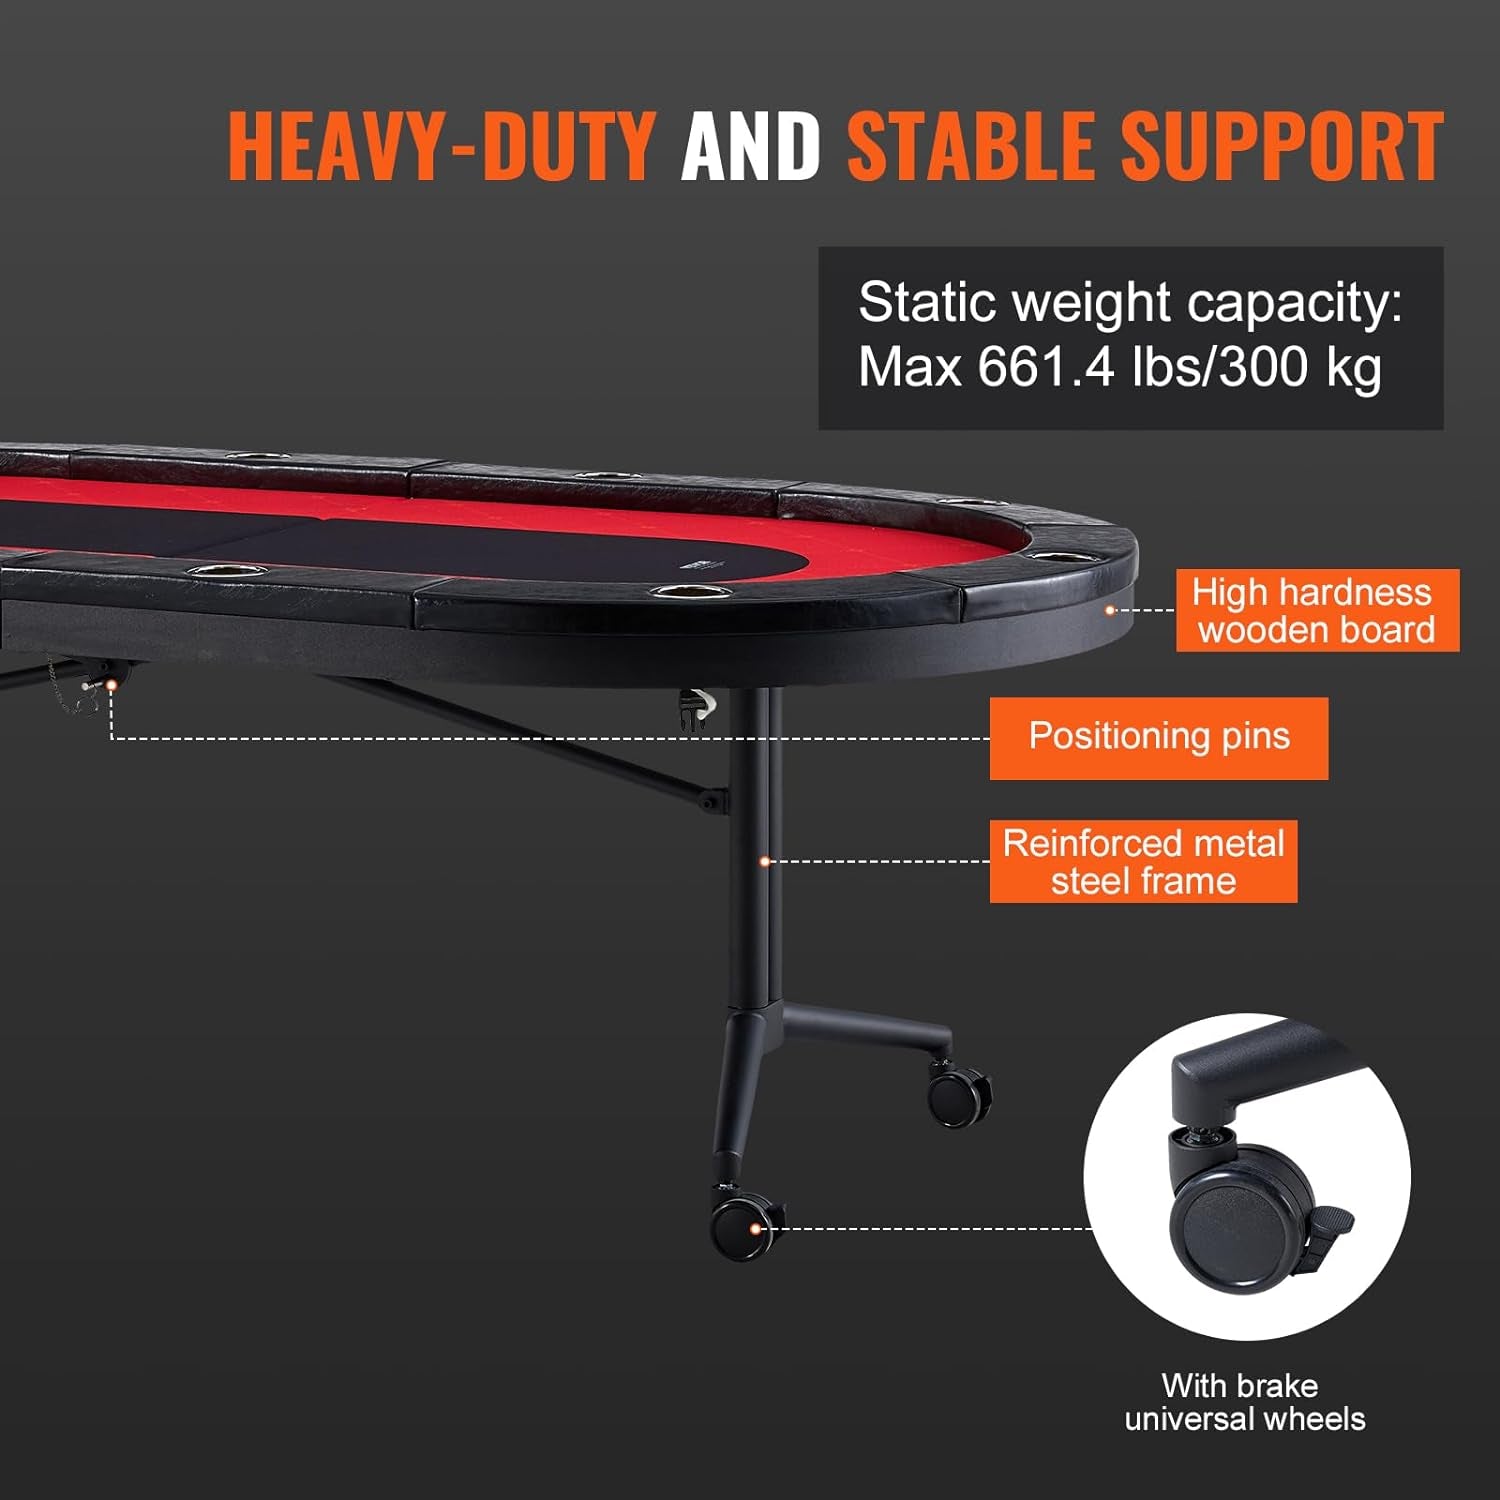 Foldable Poker Table for 10 Player, Blackjack Texas Holdem Table with Padded Rails and Stainless Steel Cup Holders, Portable Folding Card Board Game Table, 90" Oval Casino Leisure Table, Red